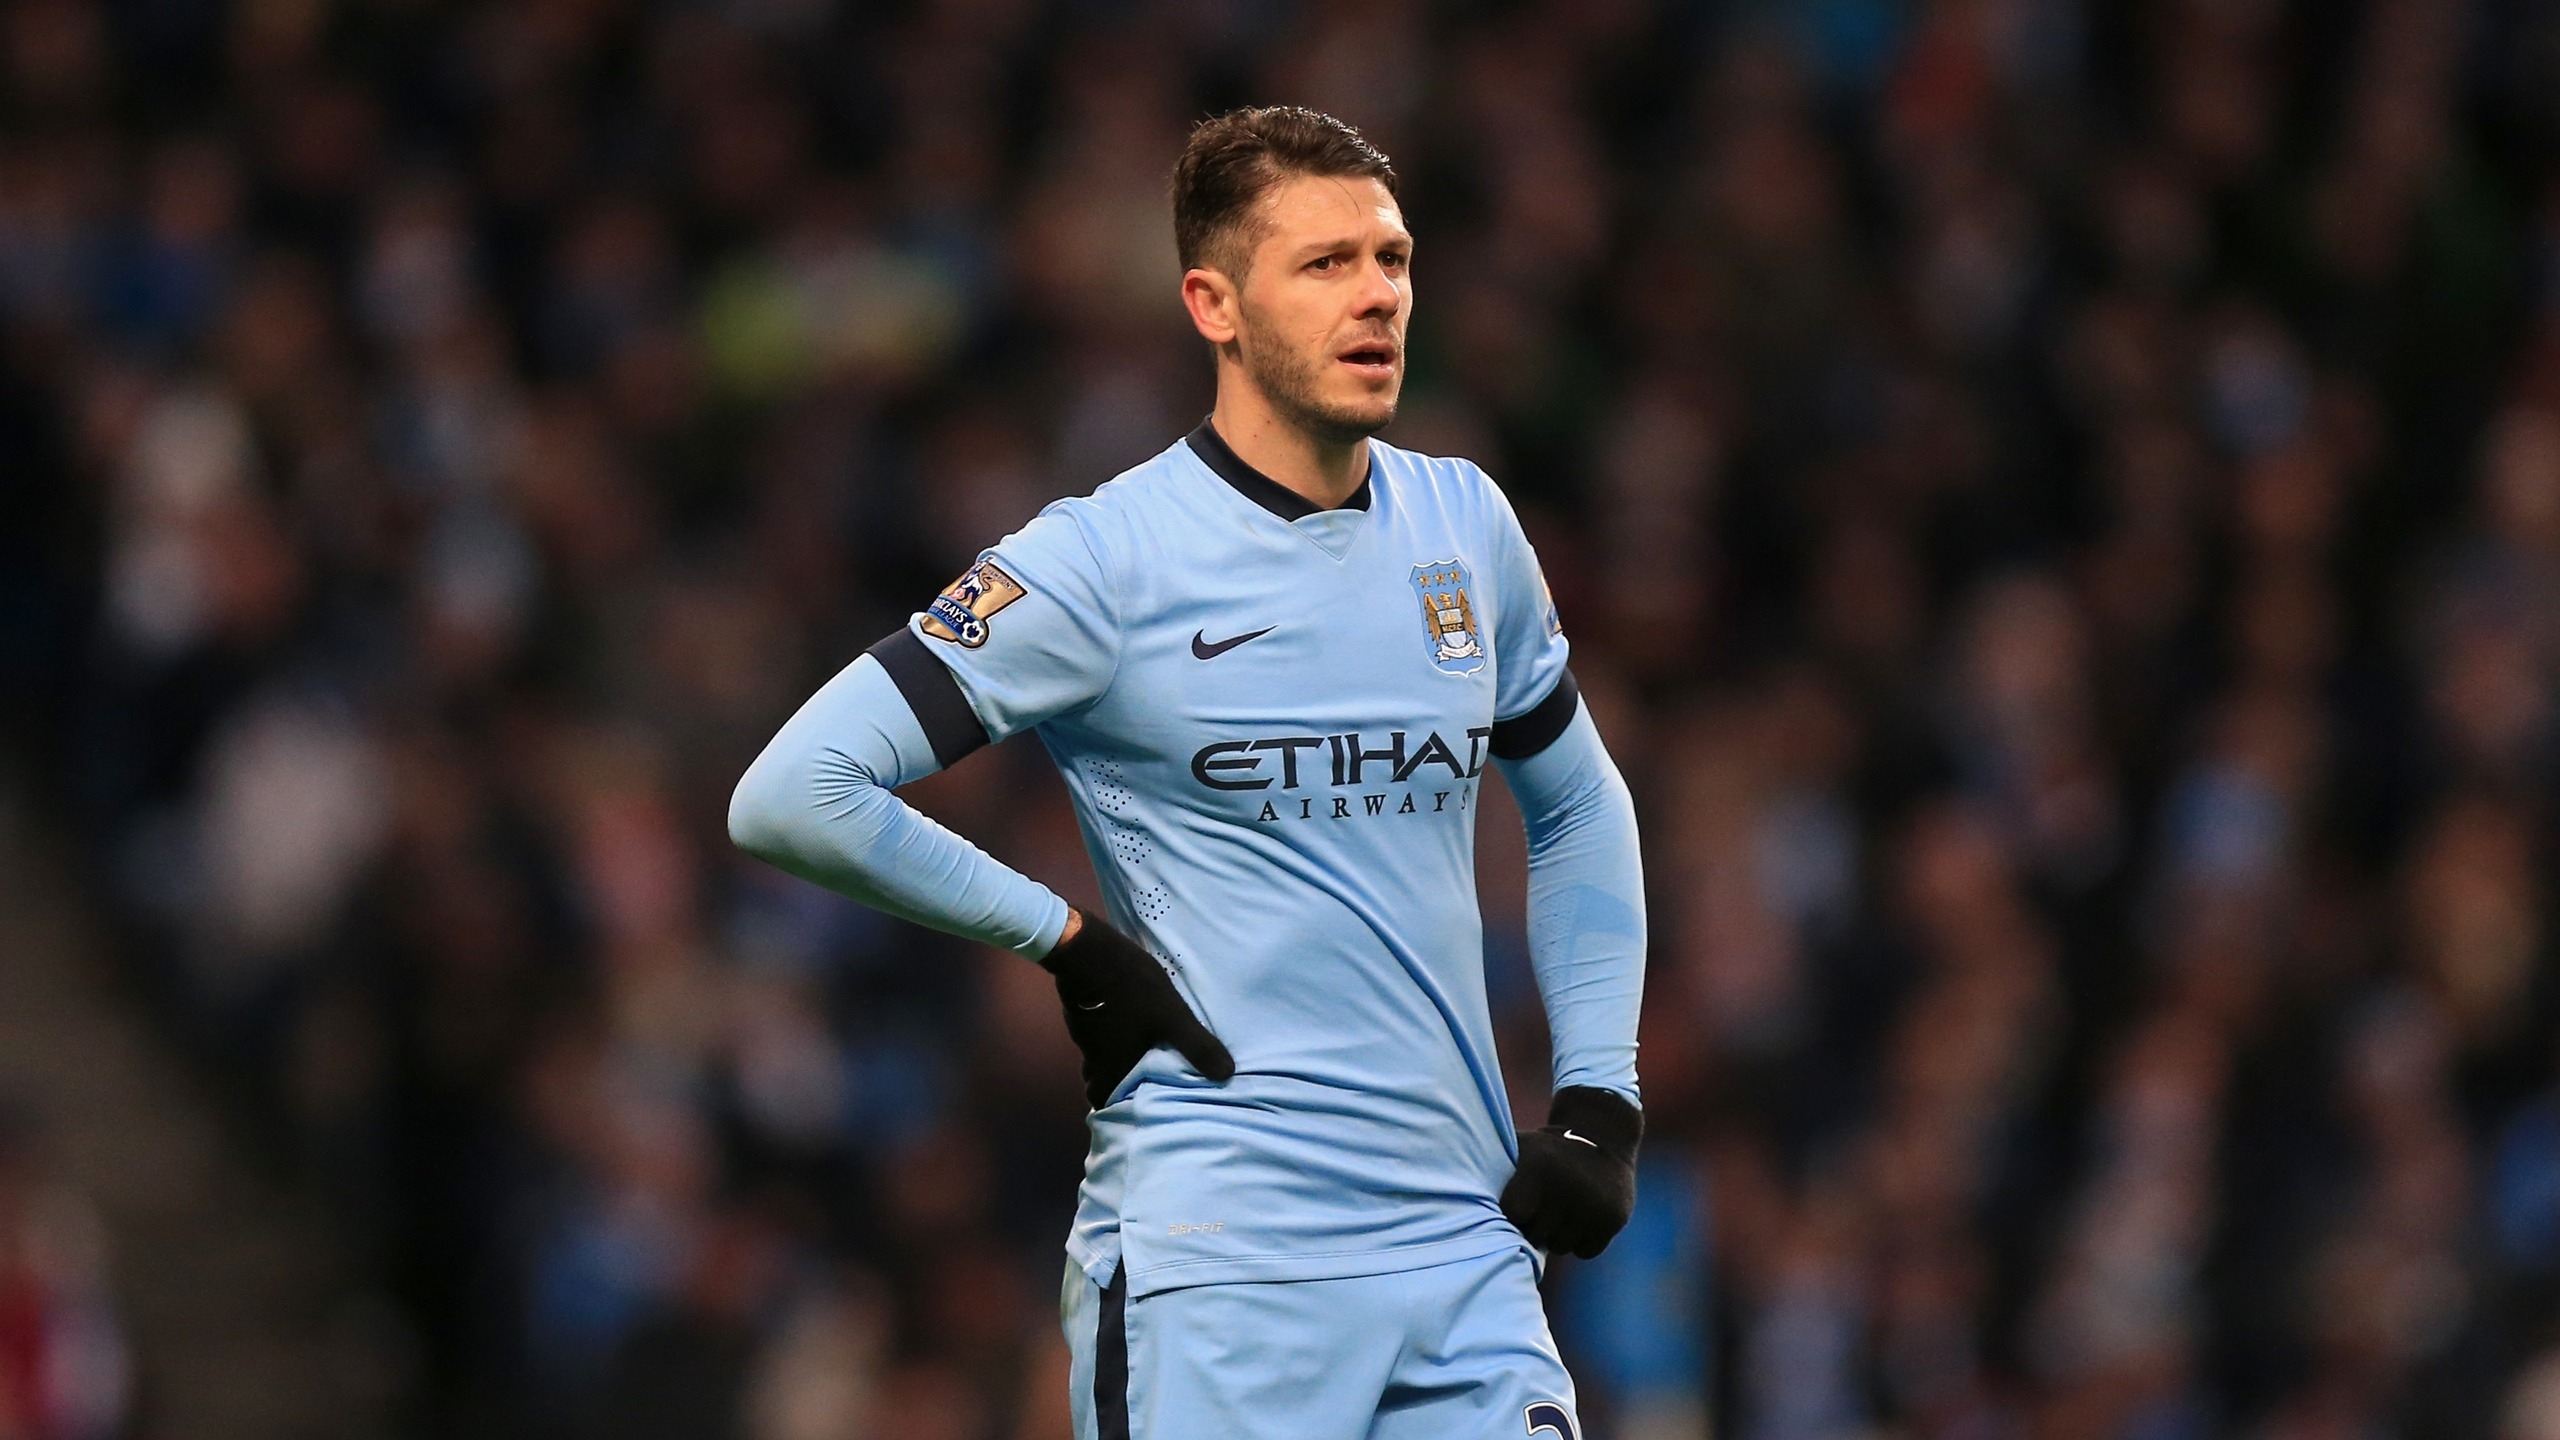 Martin Demichelis Football Player for 2560x1440 HDTV resolution